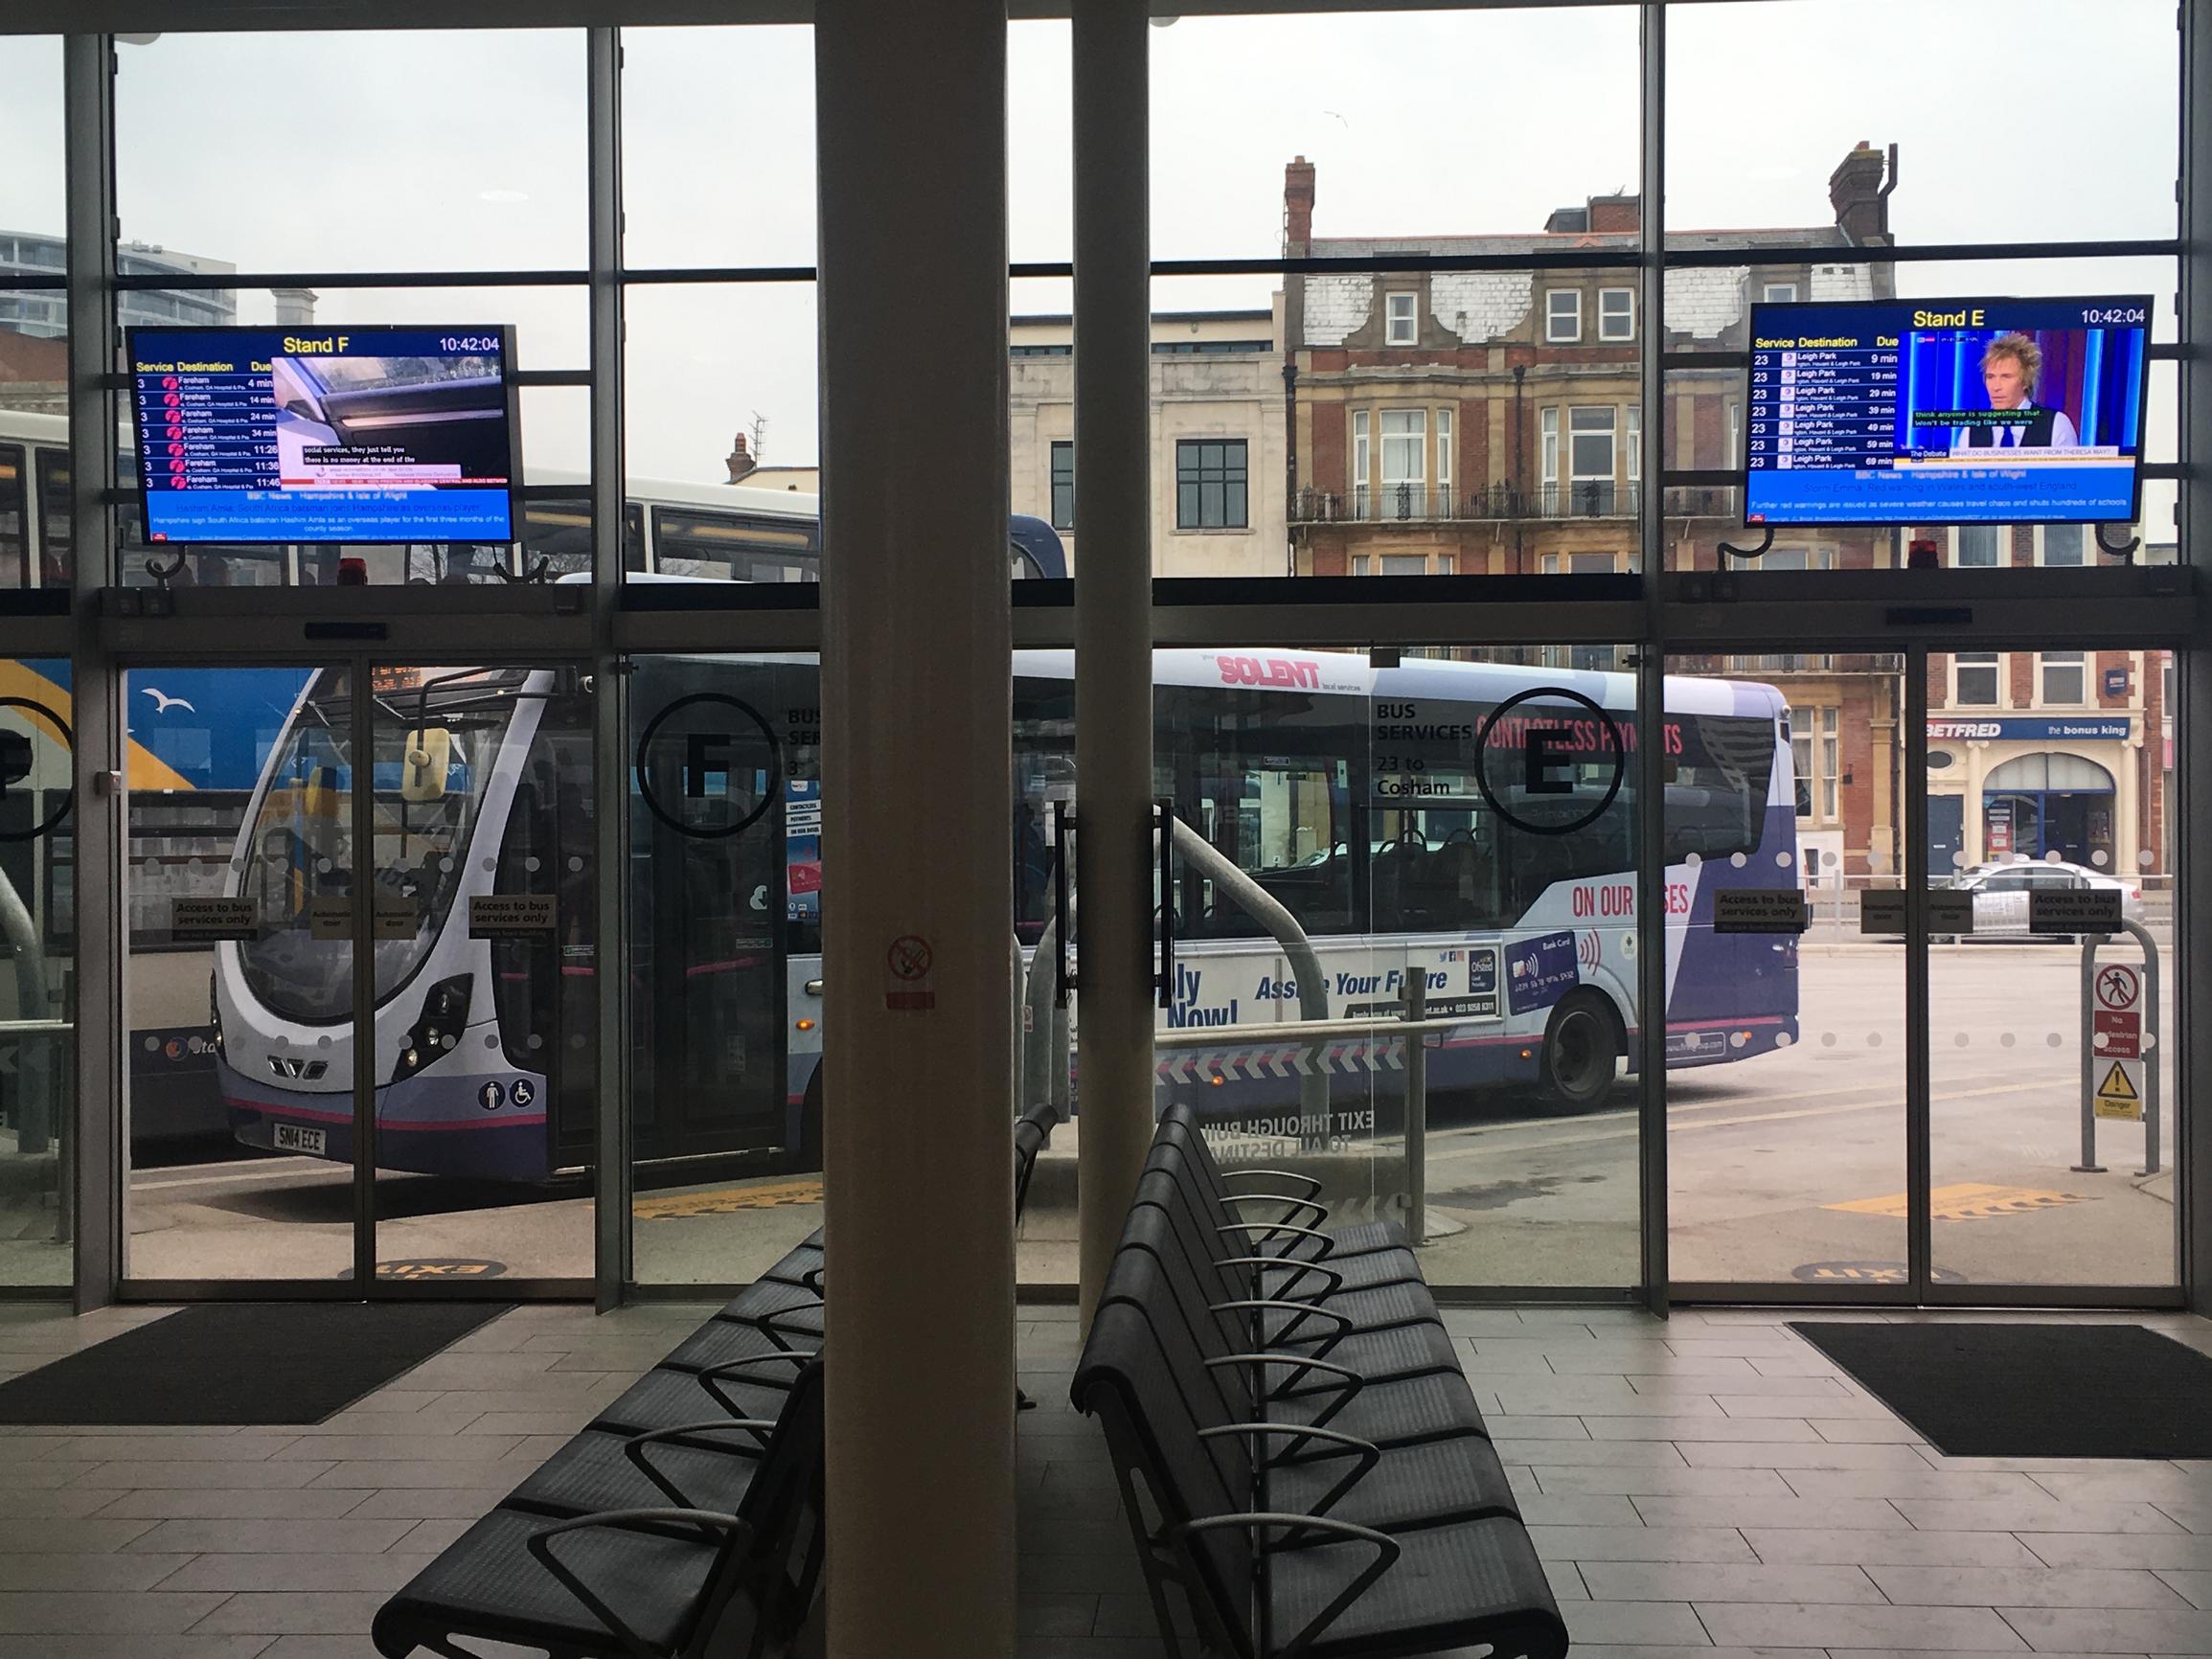 Cities across England are encouraging bus passengers with new facilities, wifi and USB charging on buses, and `real time` travel information, for example Porstmouth`s new bus interchange on The Hard